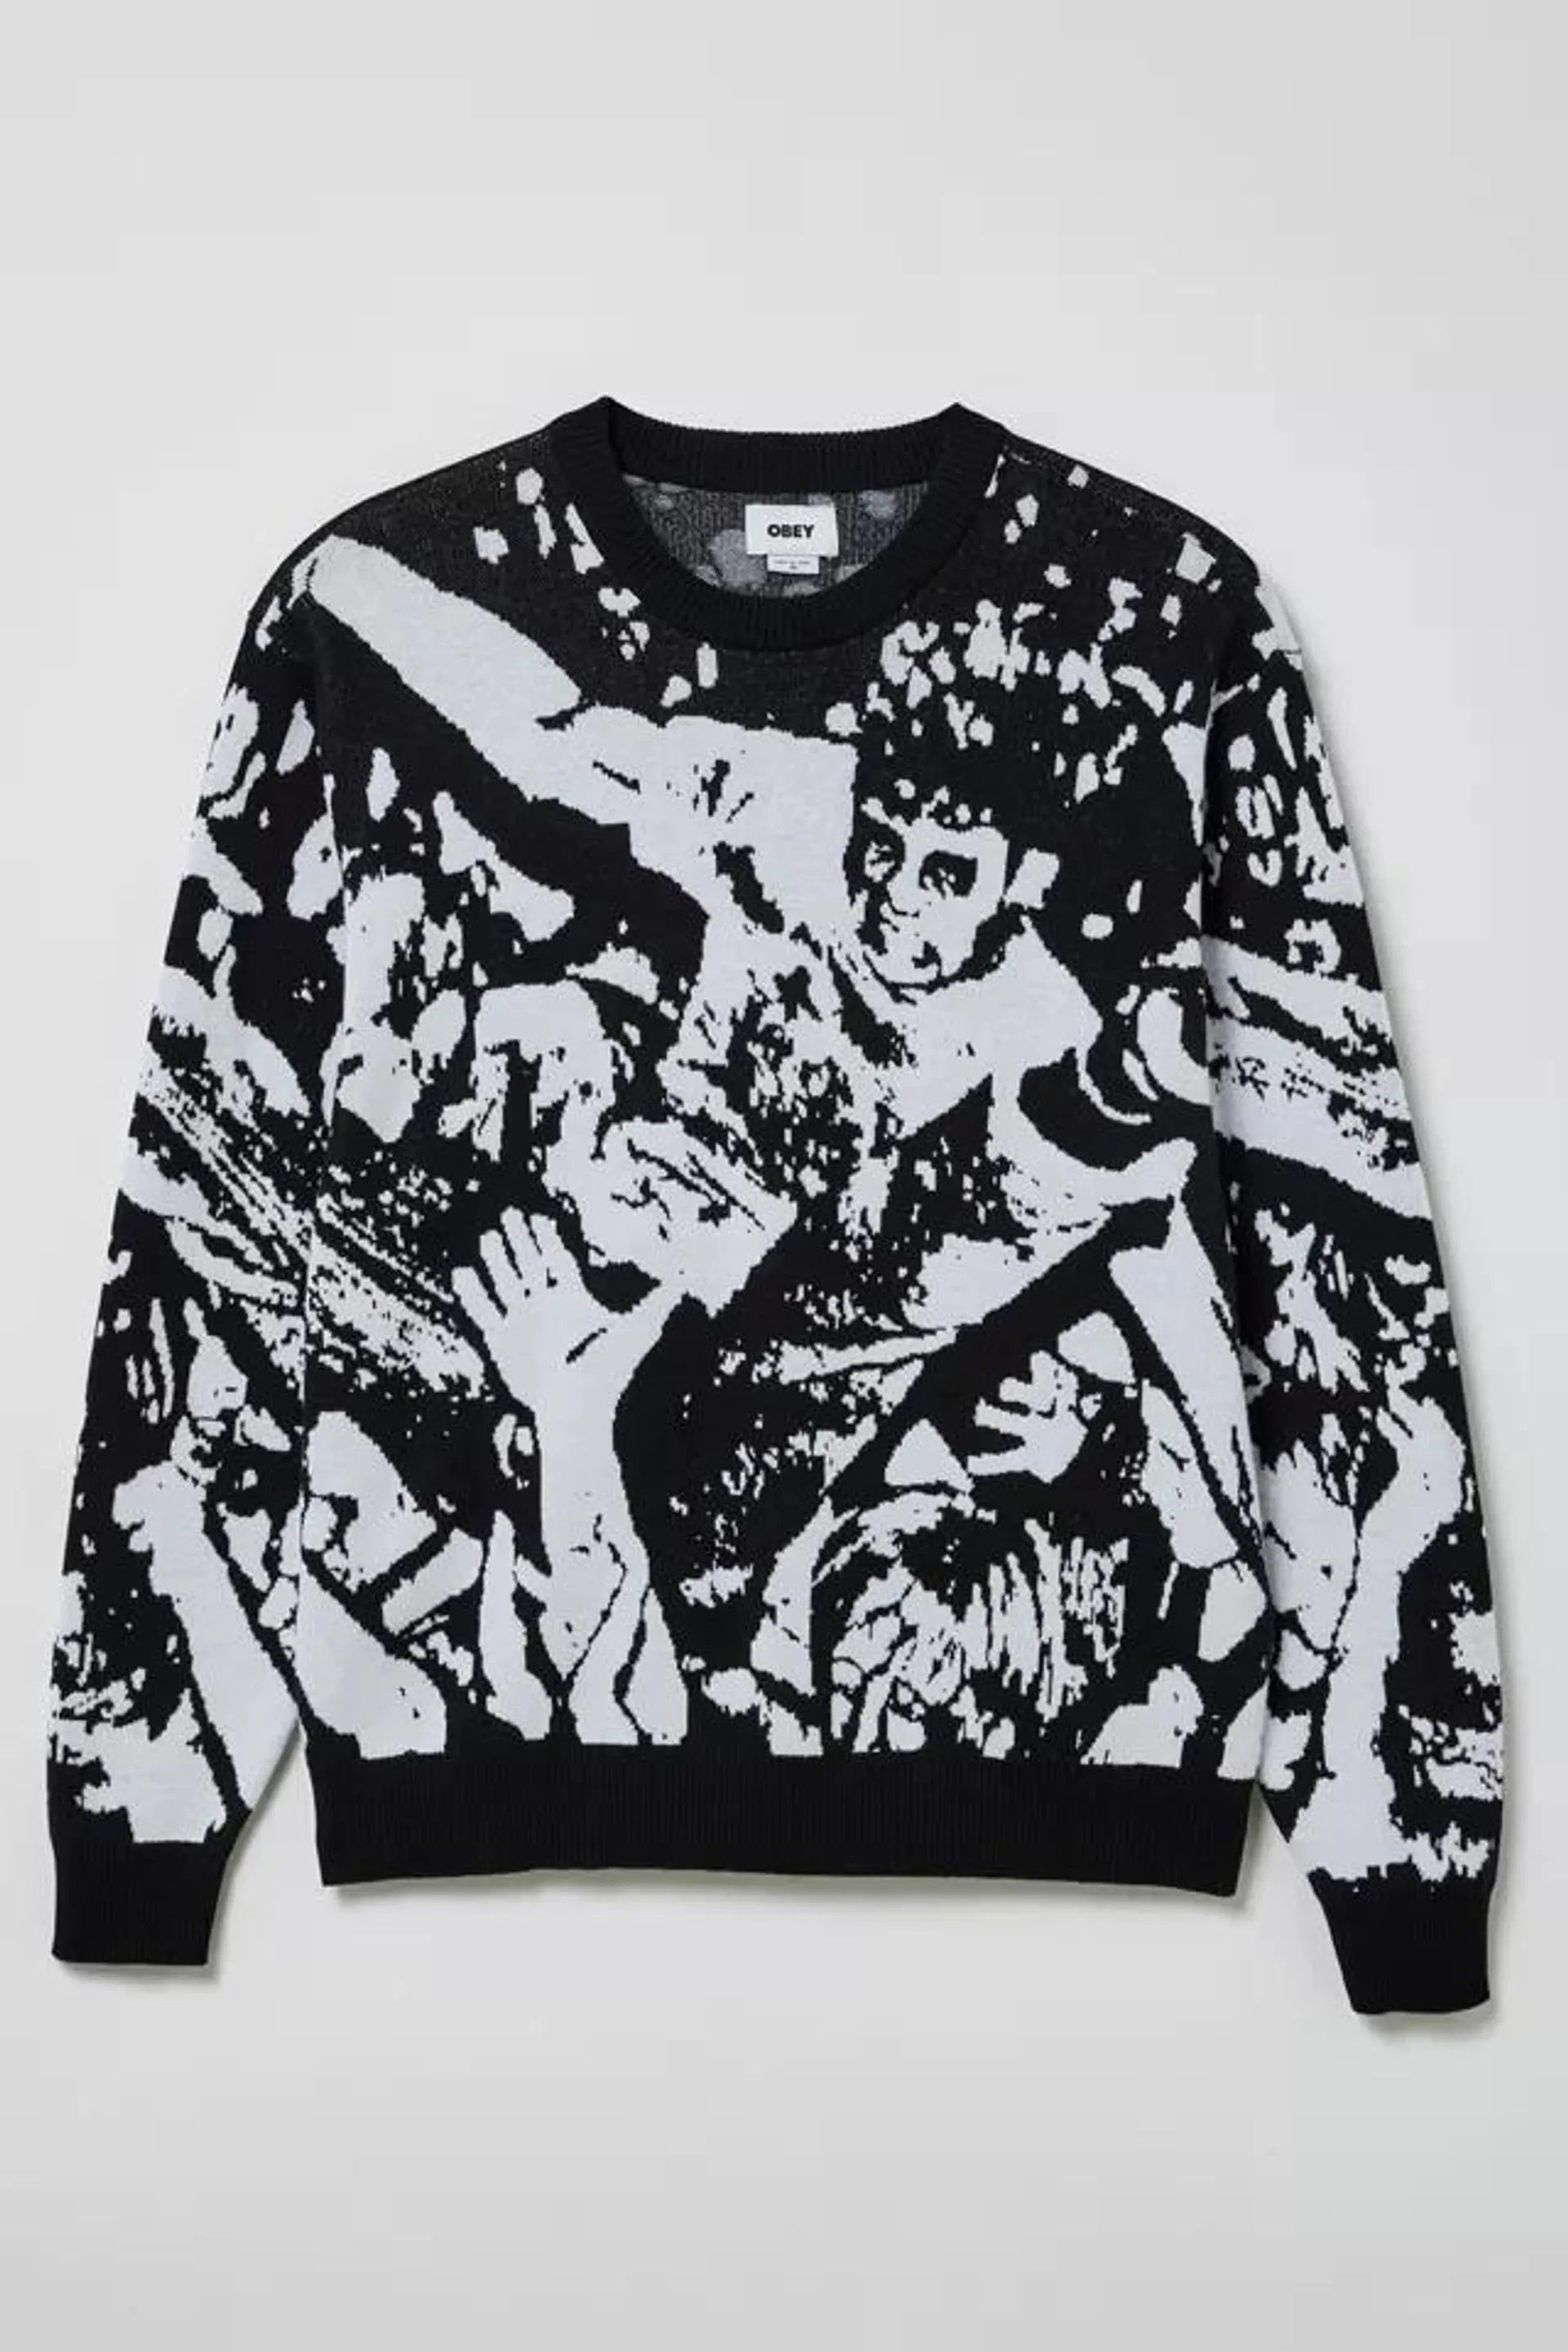 OBEY Crowd Surfing Sweater